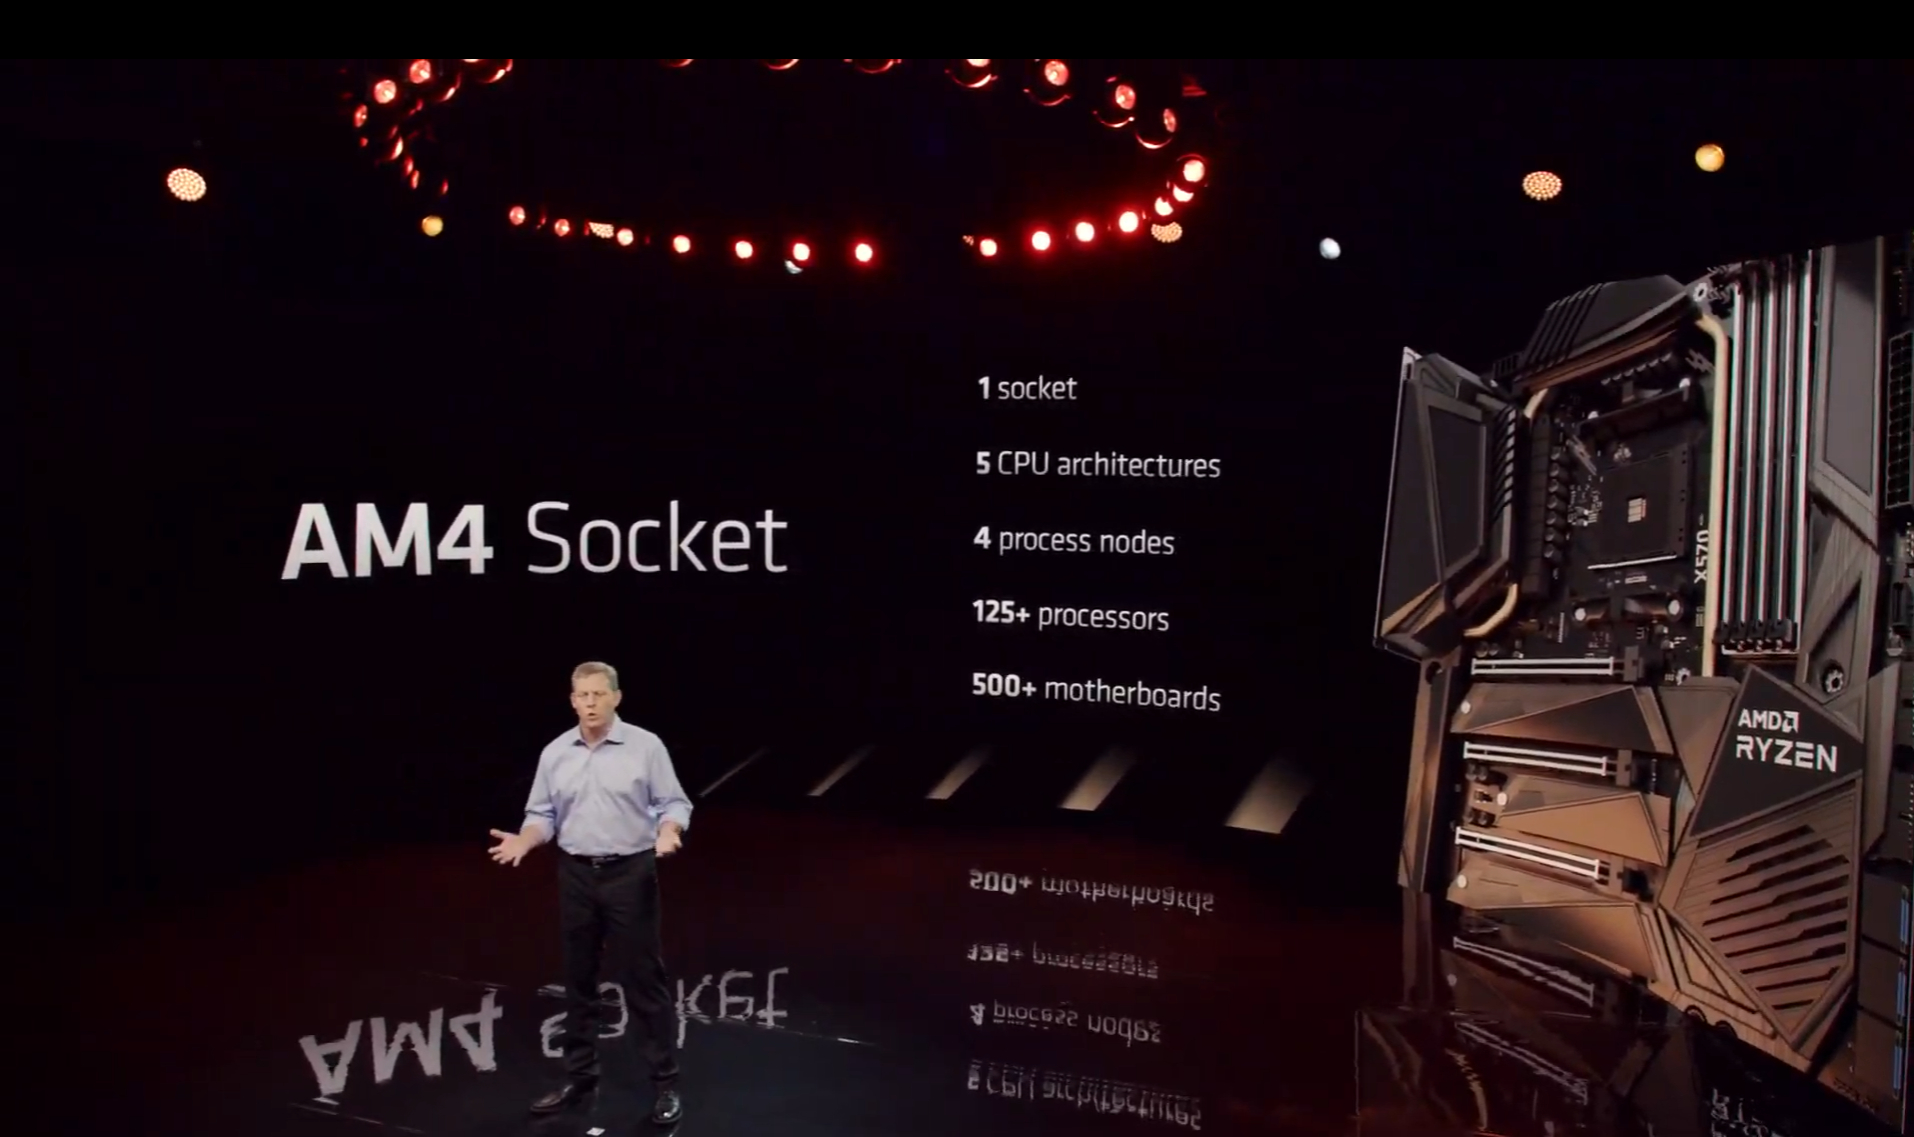 David McAfee talks about the AM4 Socket